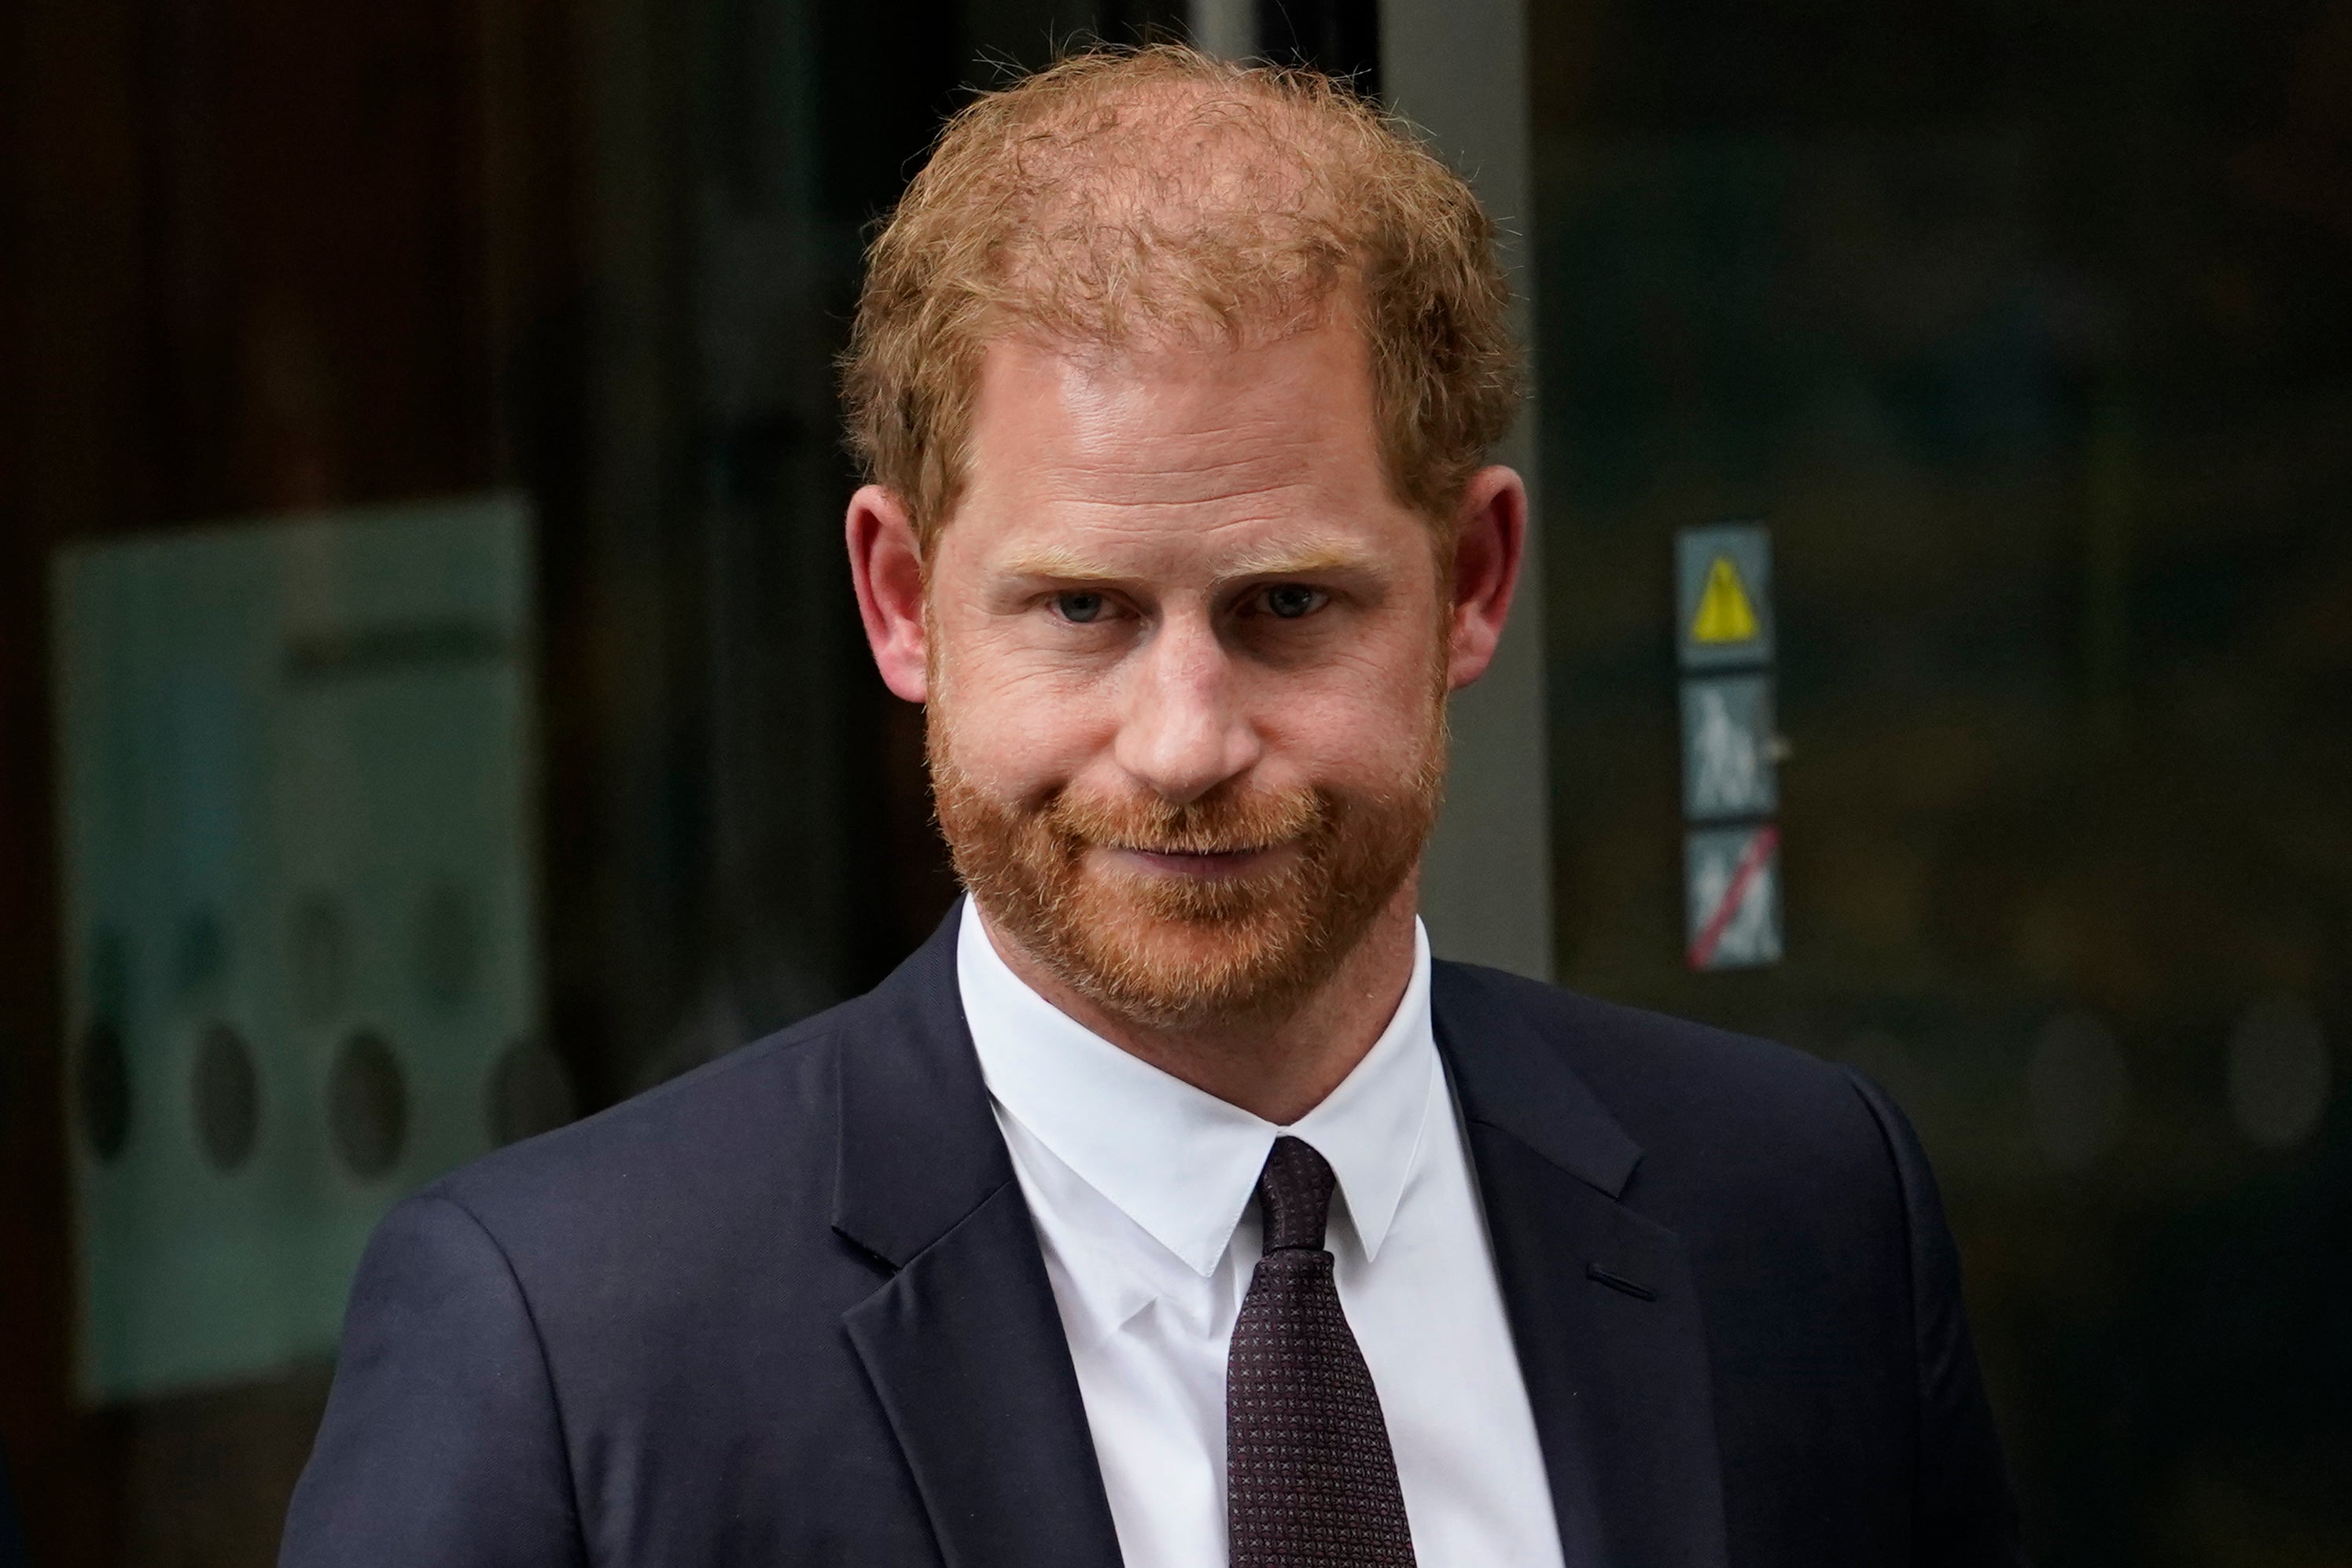 Prince Harry has been awarded £140,600 in damages for the distress caused by phone-hacking